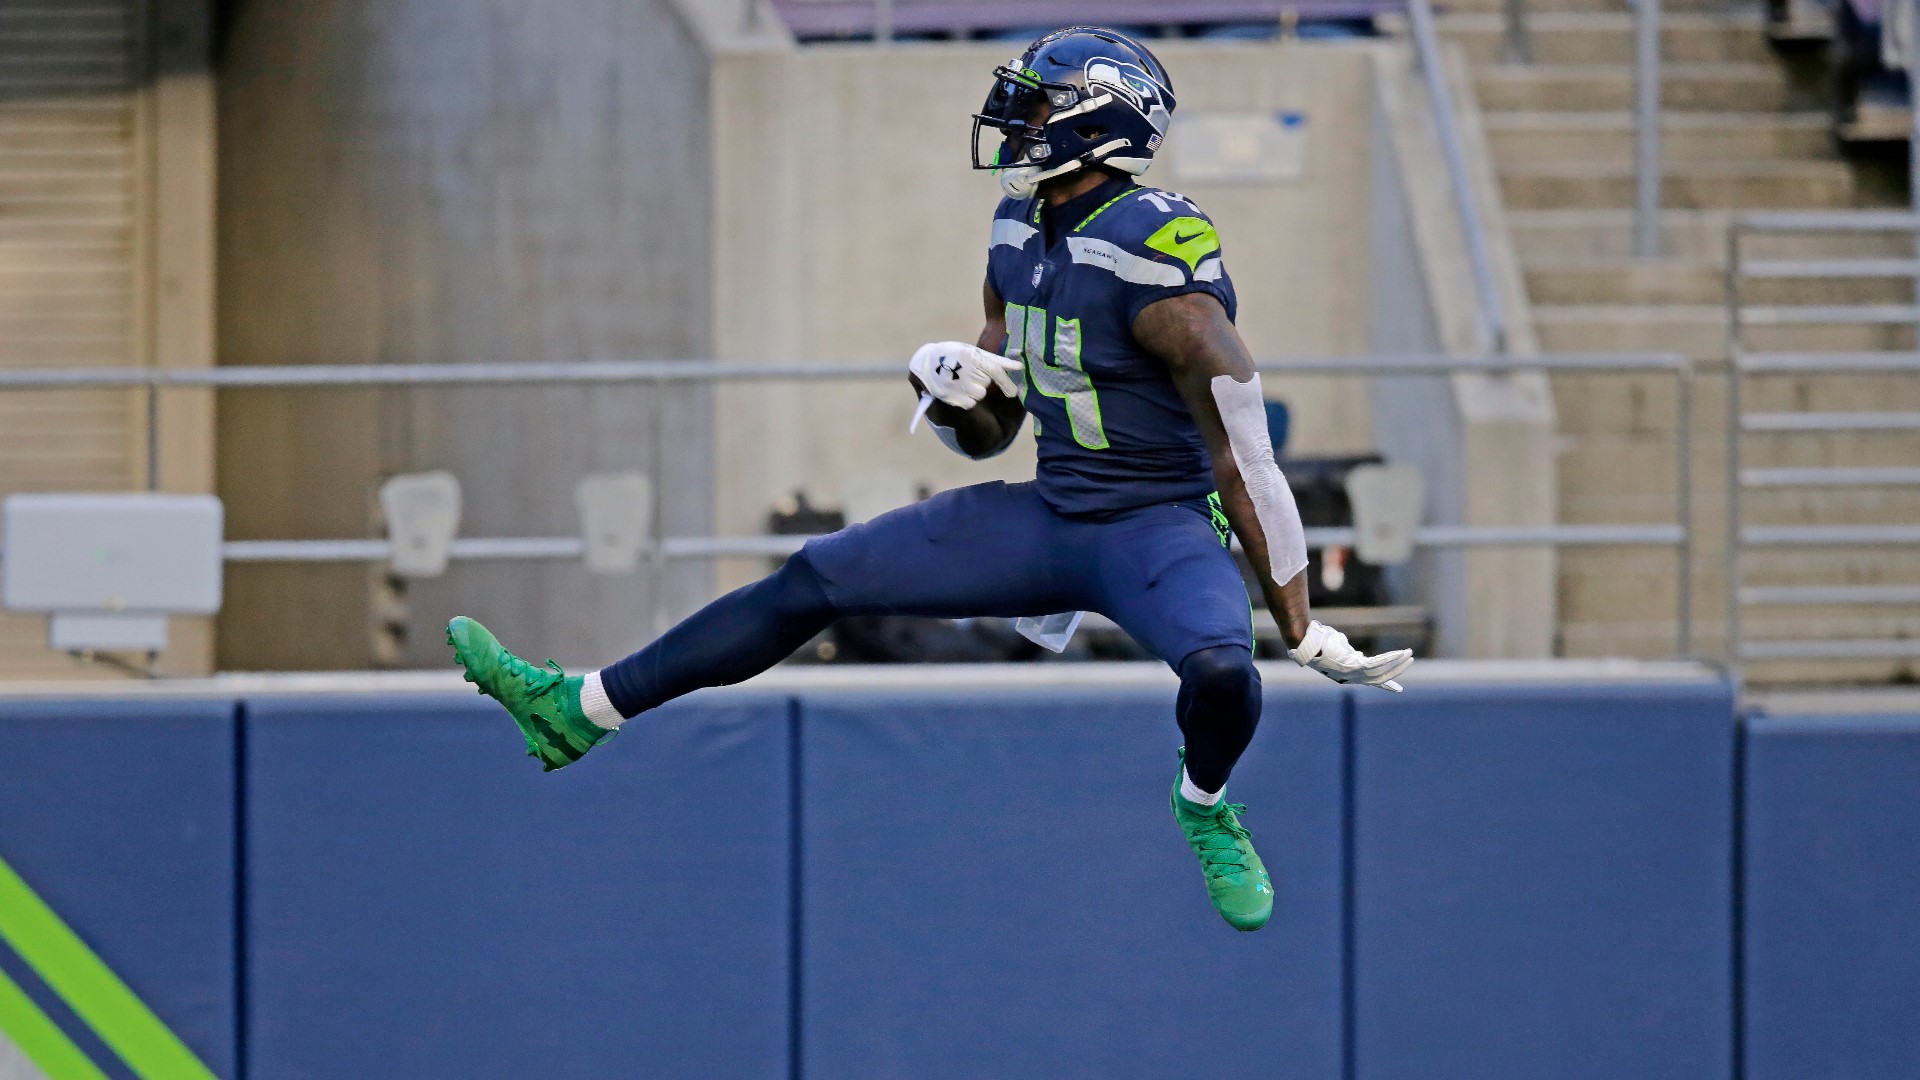 NFL football returned to Seattle Sunday as the Seahawks played the New England Patriots in an empty CenturyLink Field.